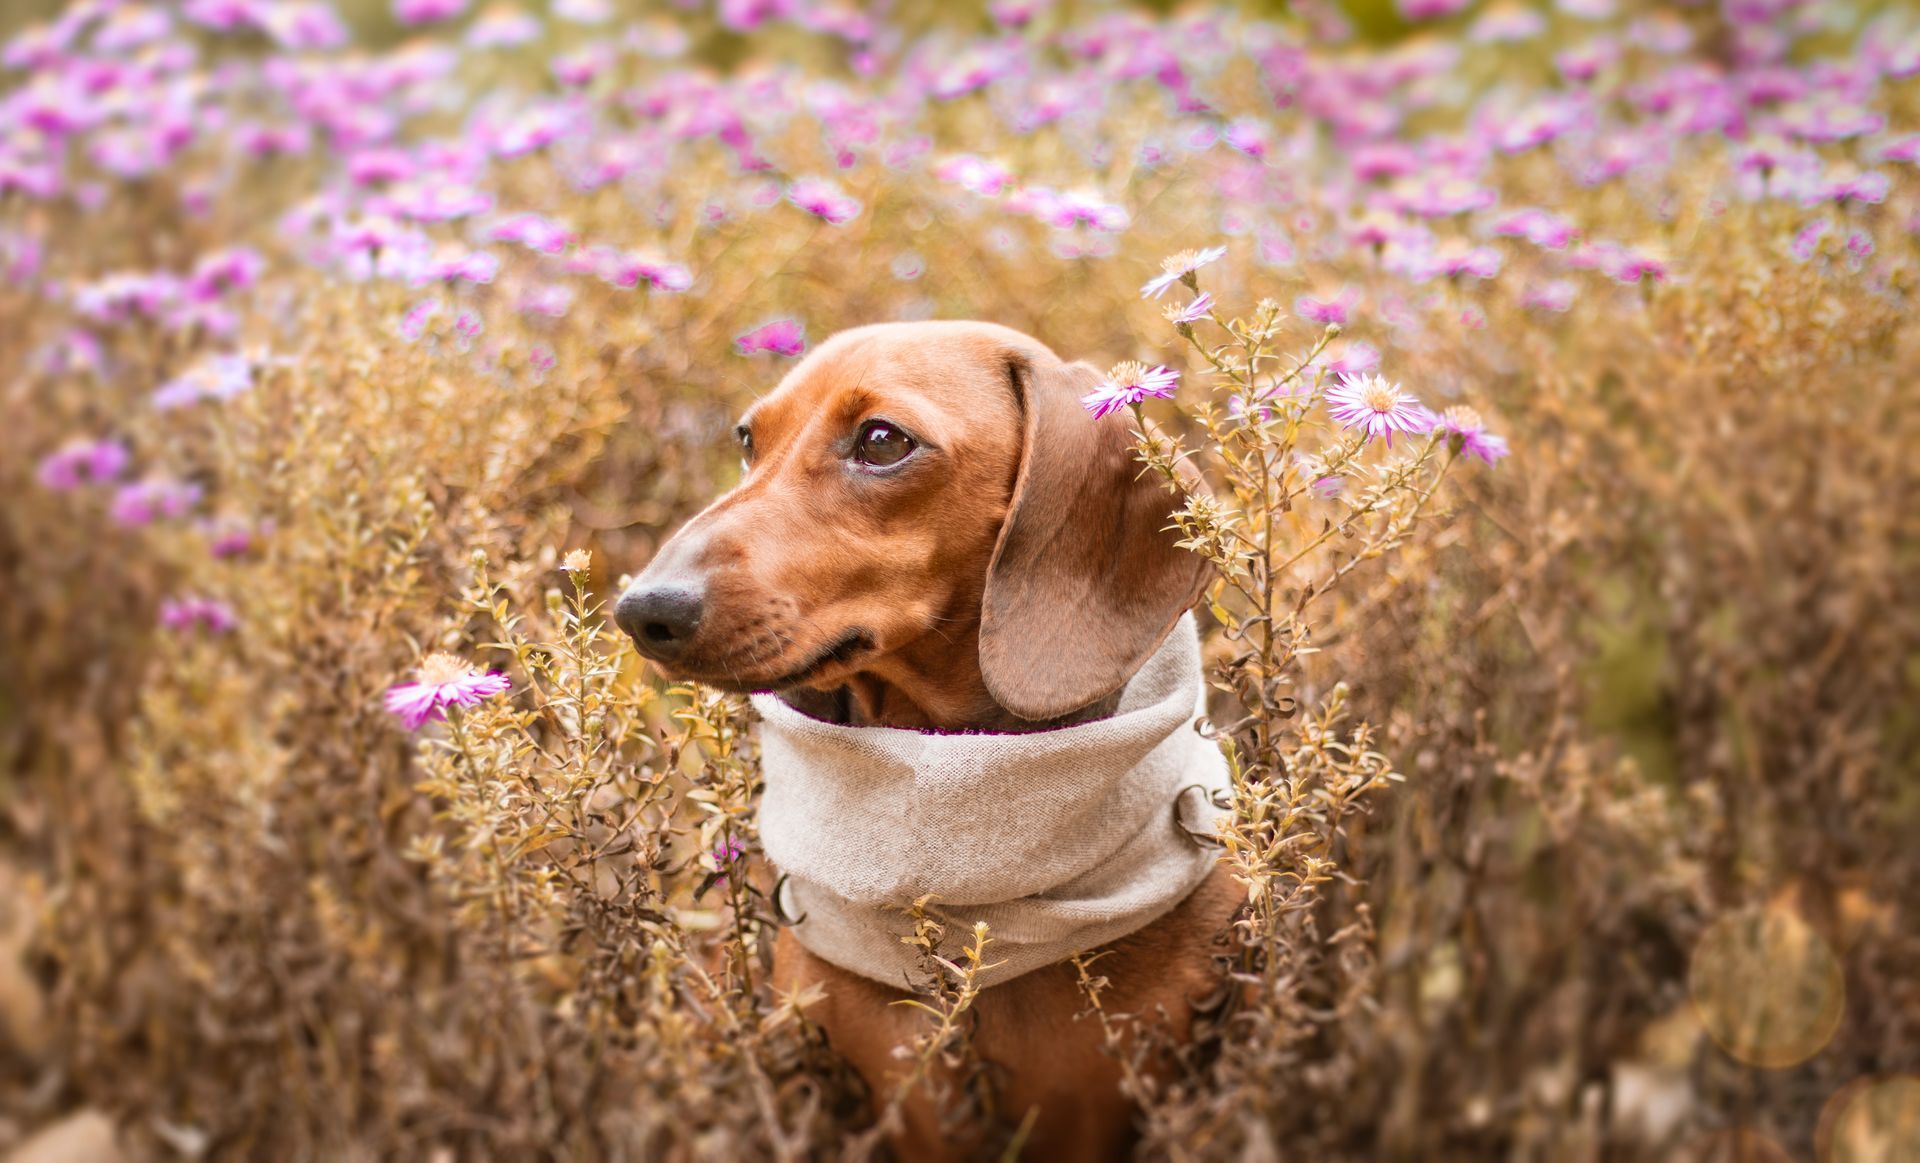 a dachshund wearing a scarf is standing in a field of purple flowers .